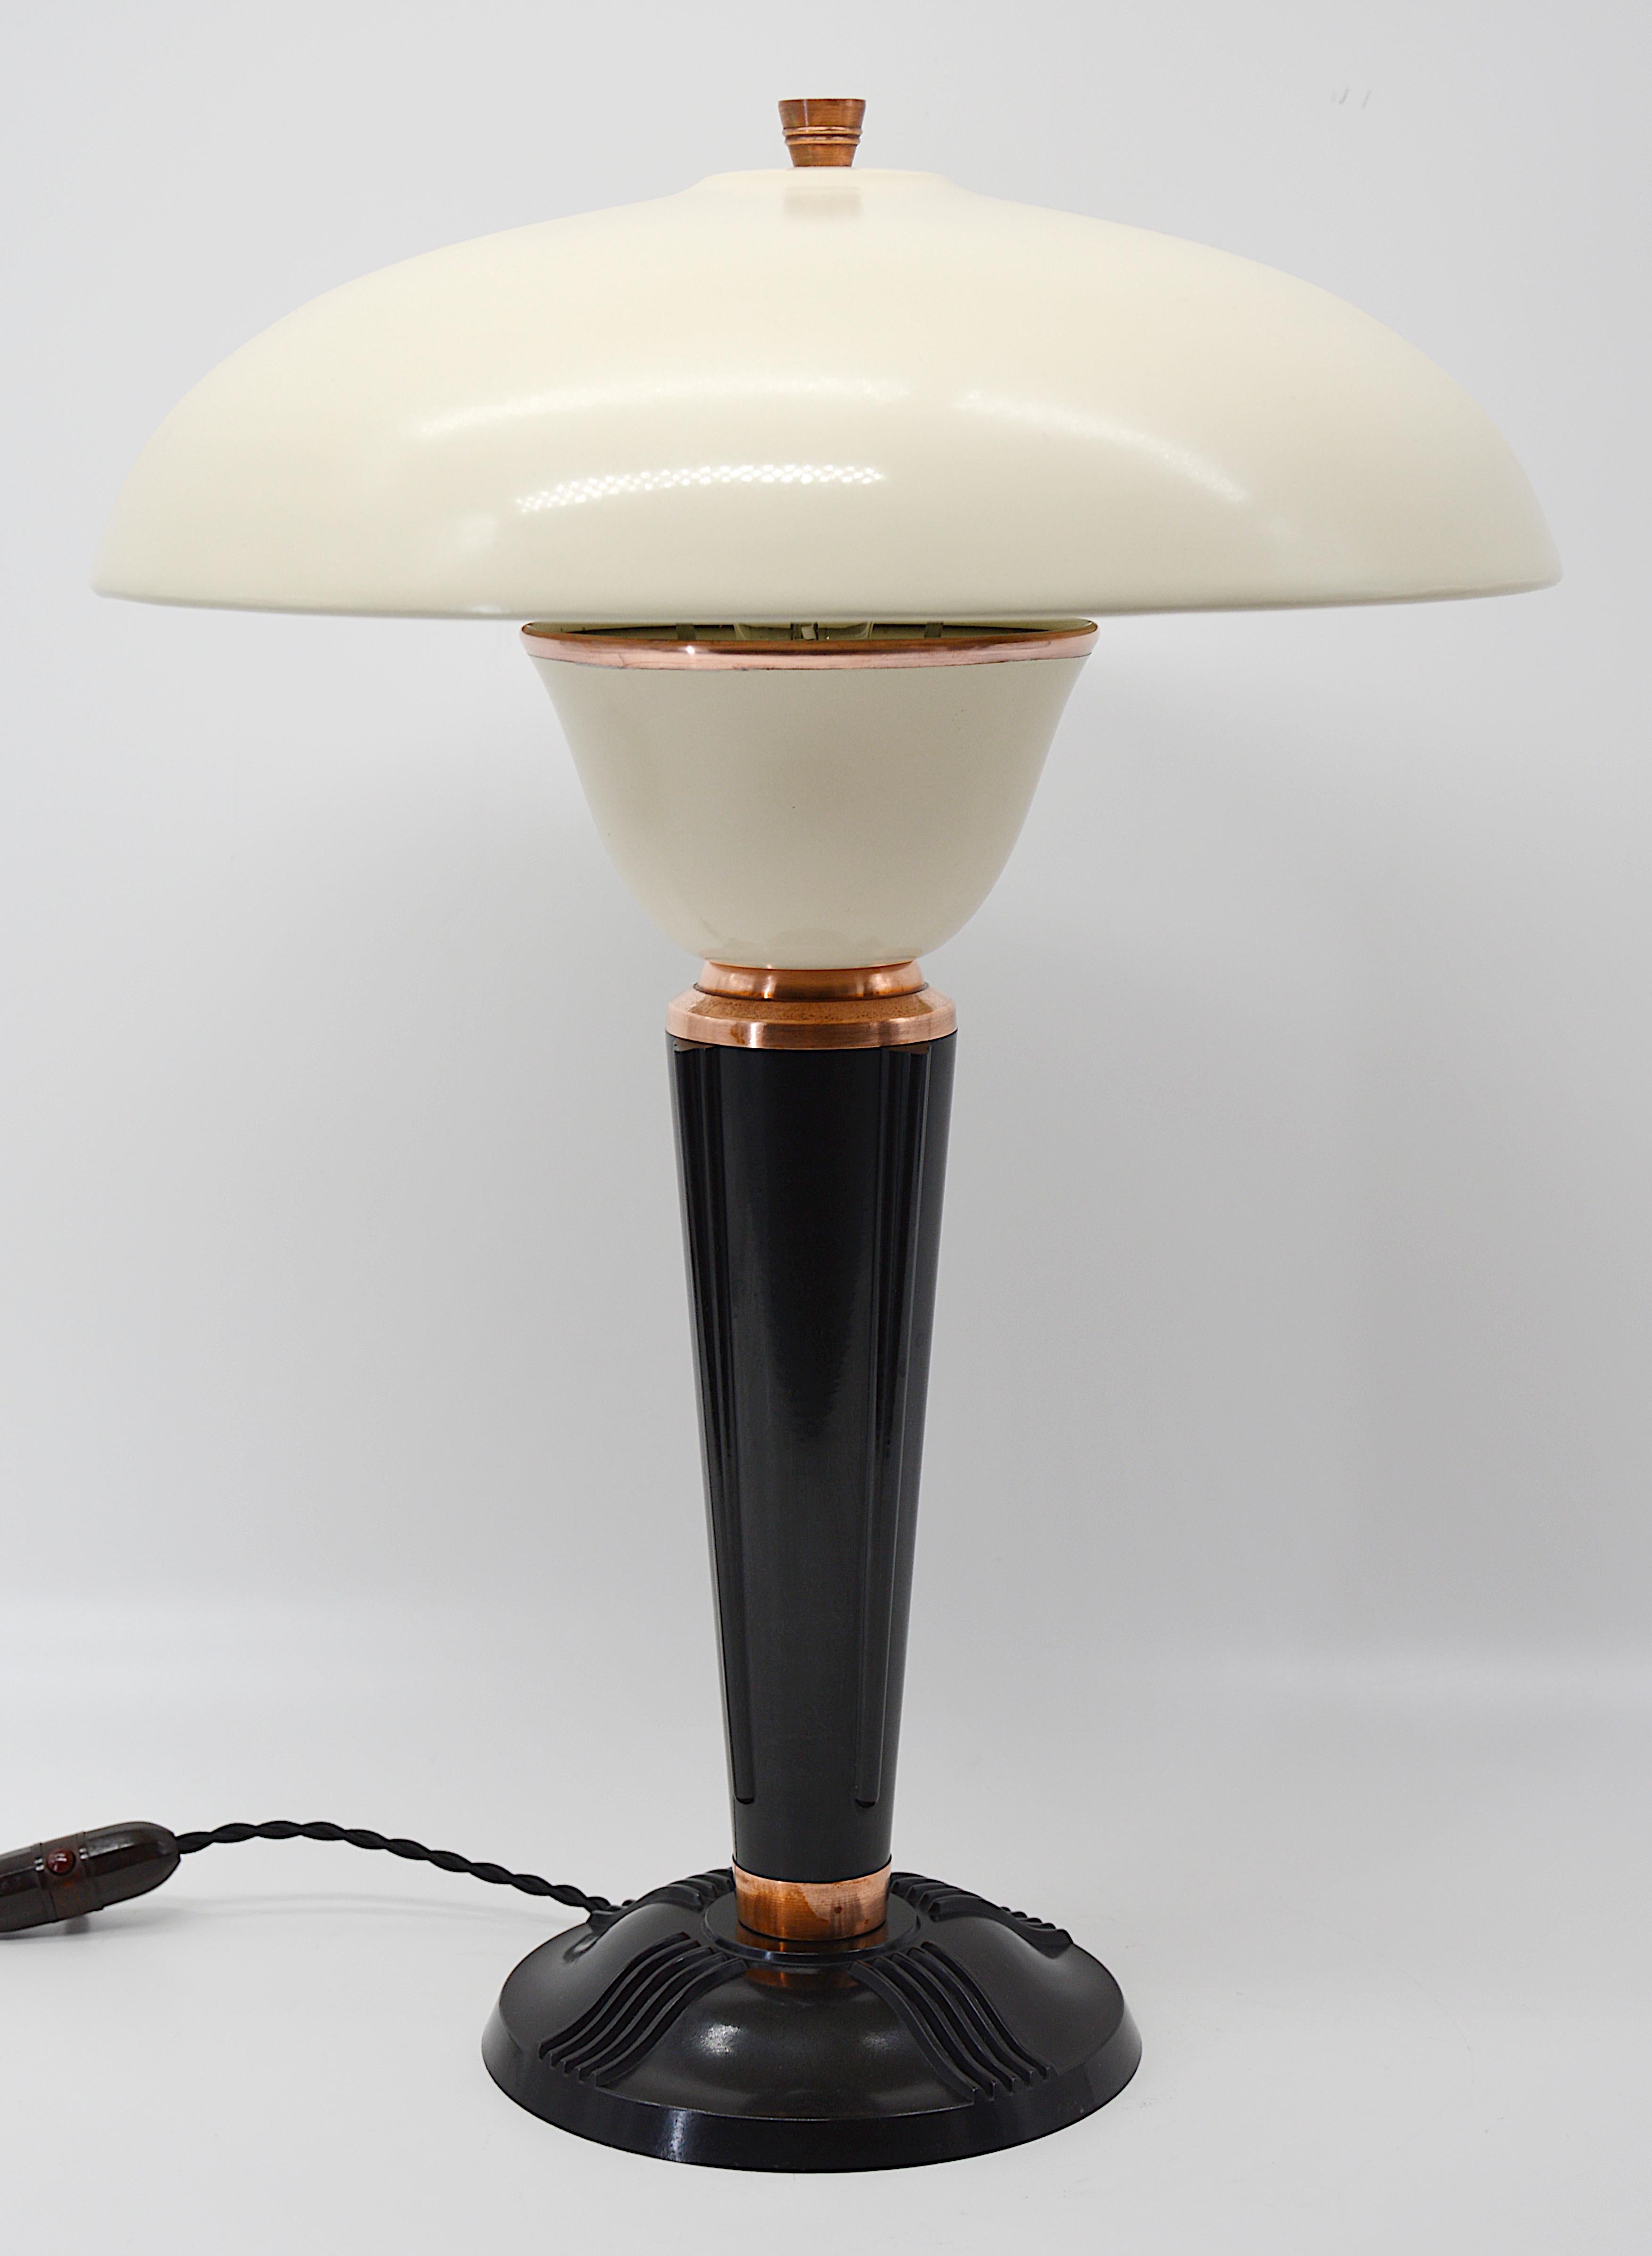 Brass Eileen Gray for Jumo French Art Deco Desk/Table Lamp Late 1930s